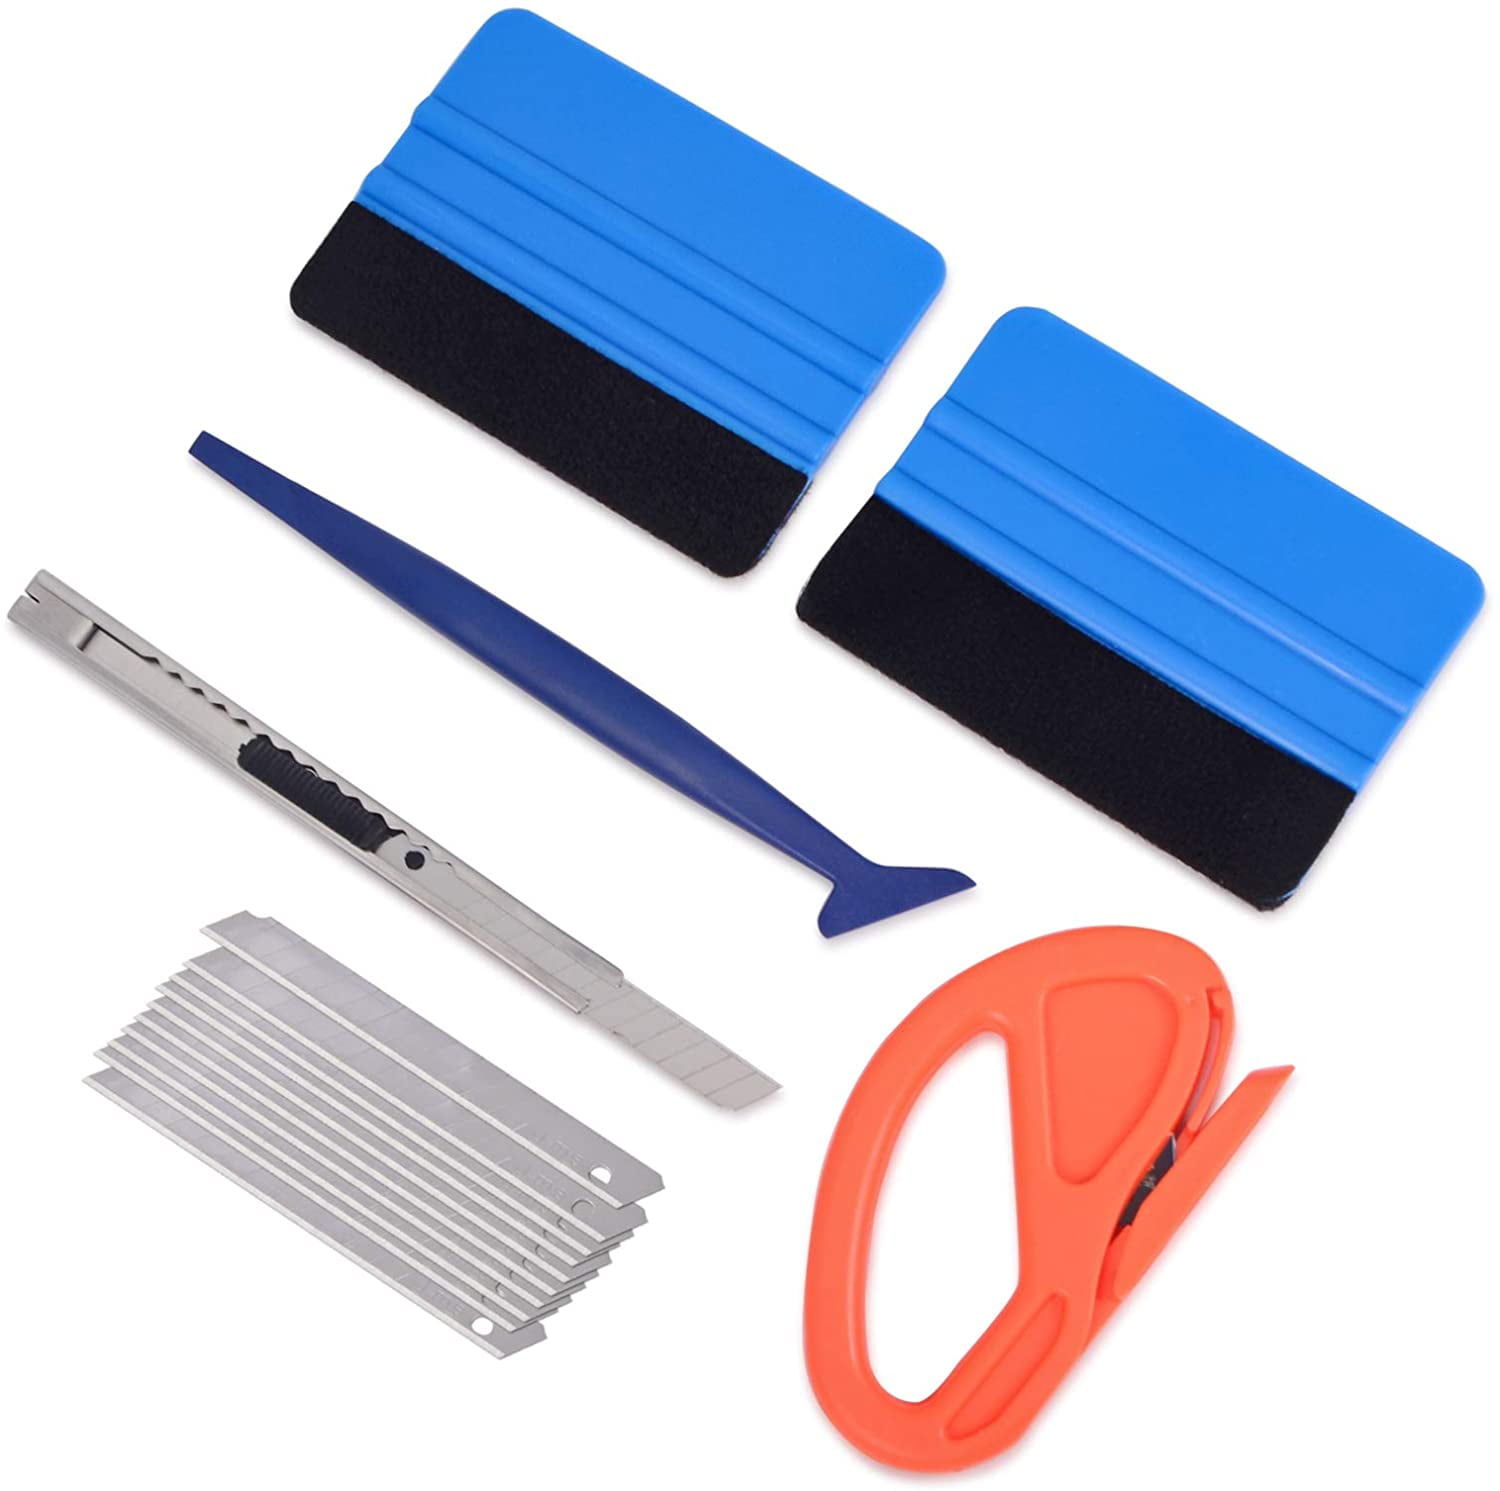 Gomake Vinyl Wrap Tool Kit Window Tint Tools for Cars Wrapping Window Film  Wallpaper Installation- Include Vinyl Squeegees, Scraper, Magnet Holders,  Vinyl Gloves, Film Cutters, Heat Gun for Vinyl Wrap